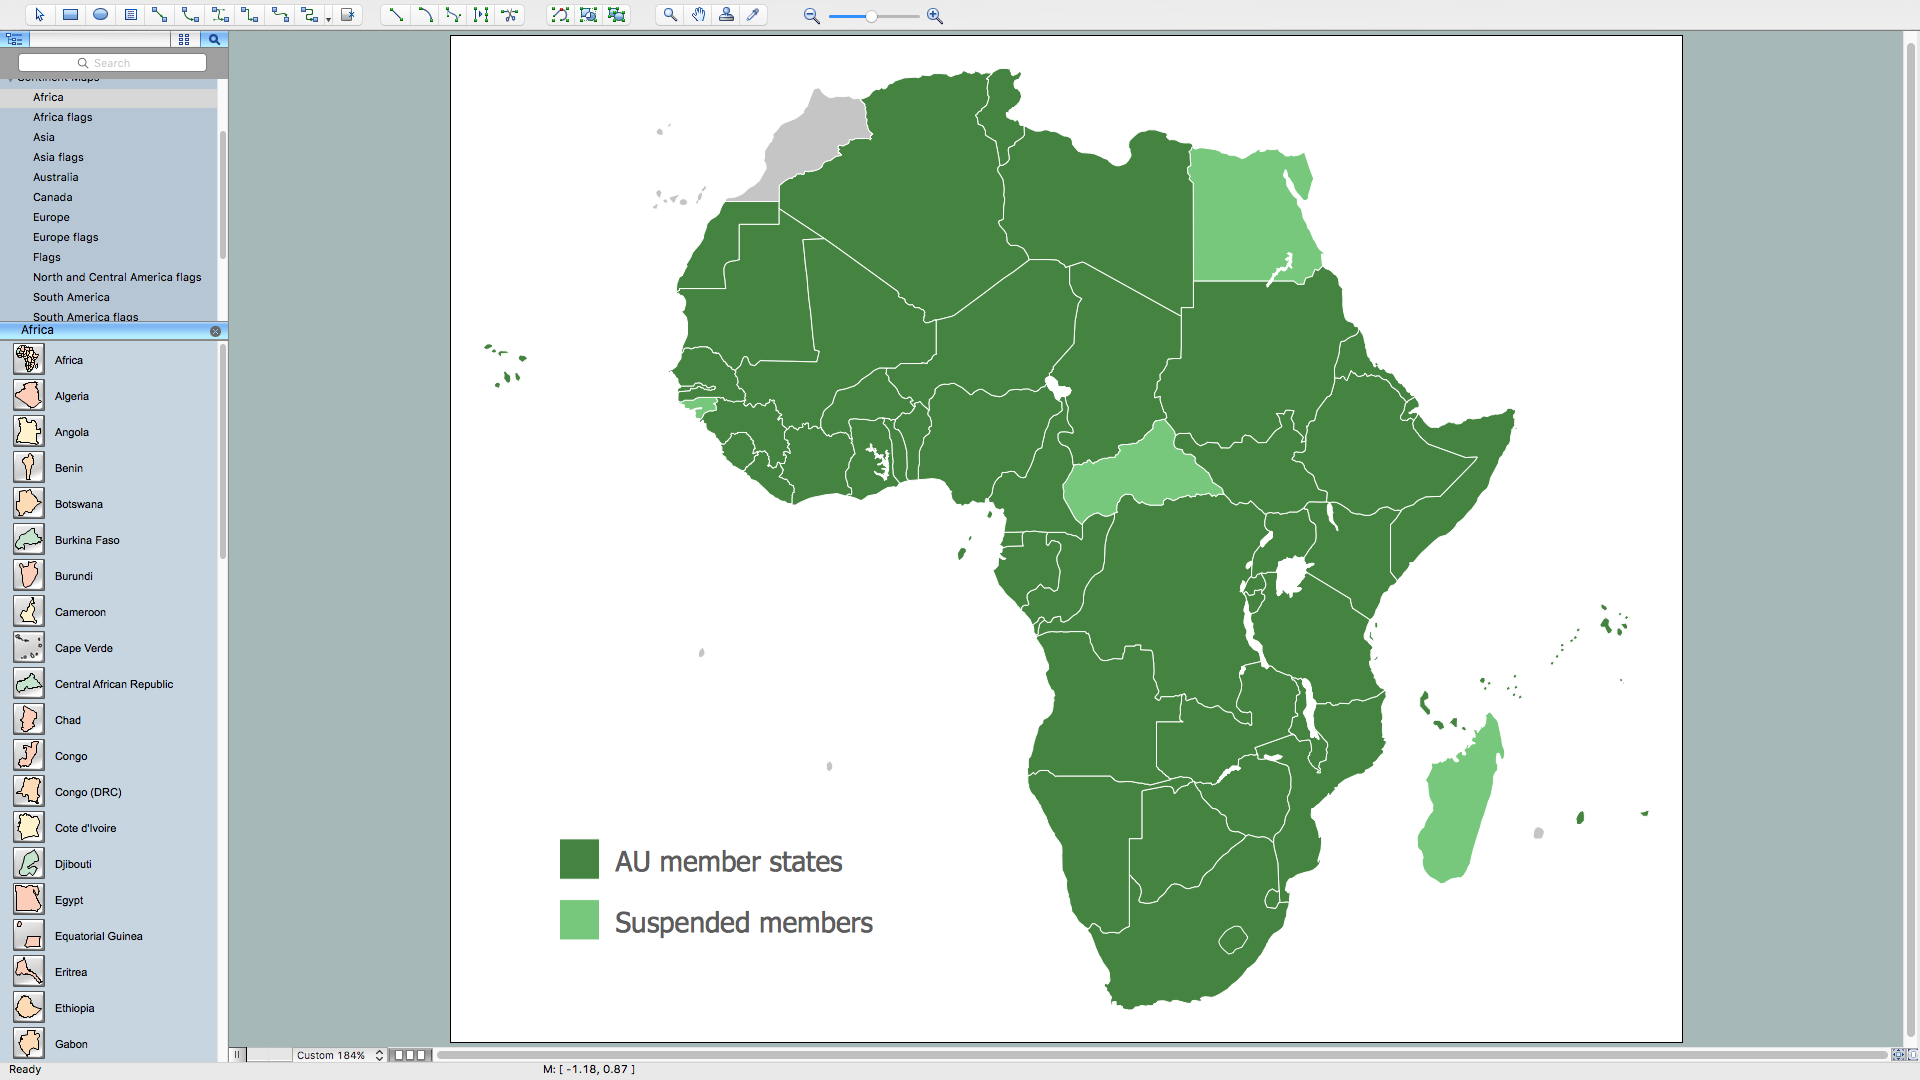 African Union with suspended states